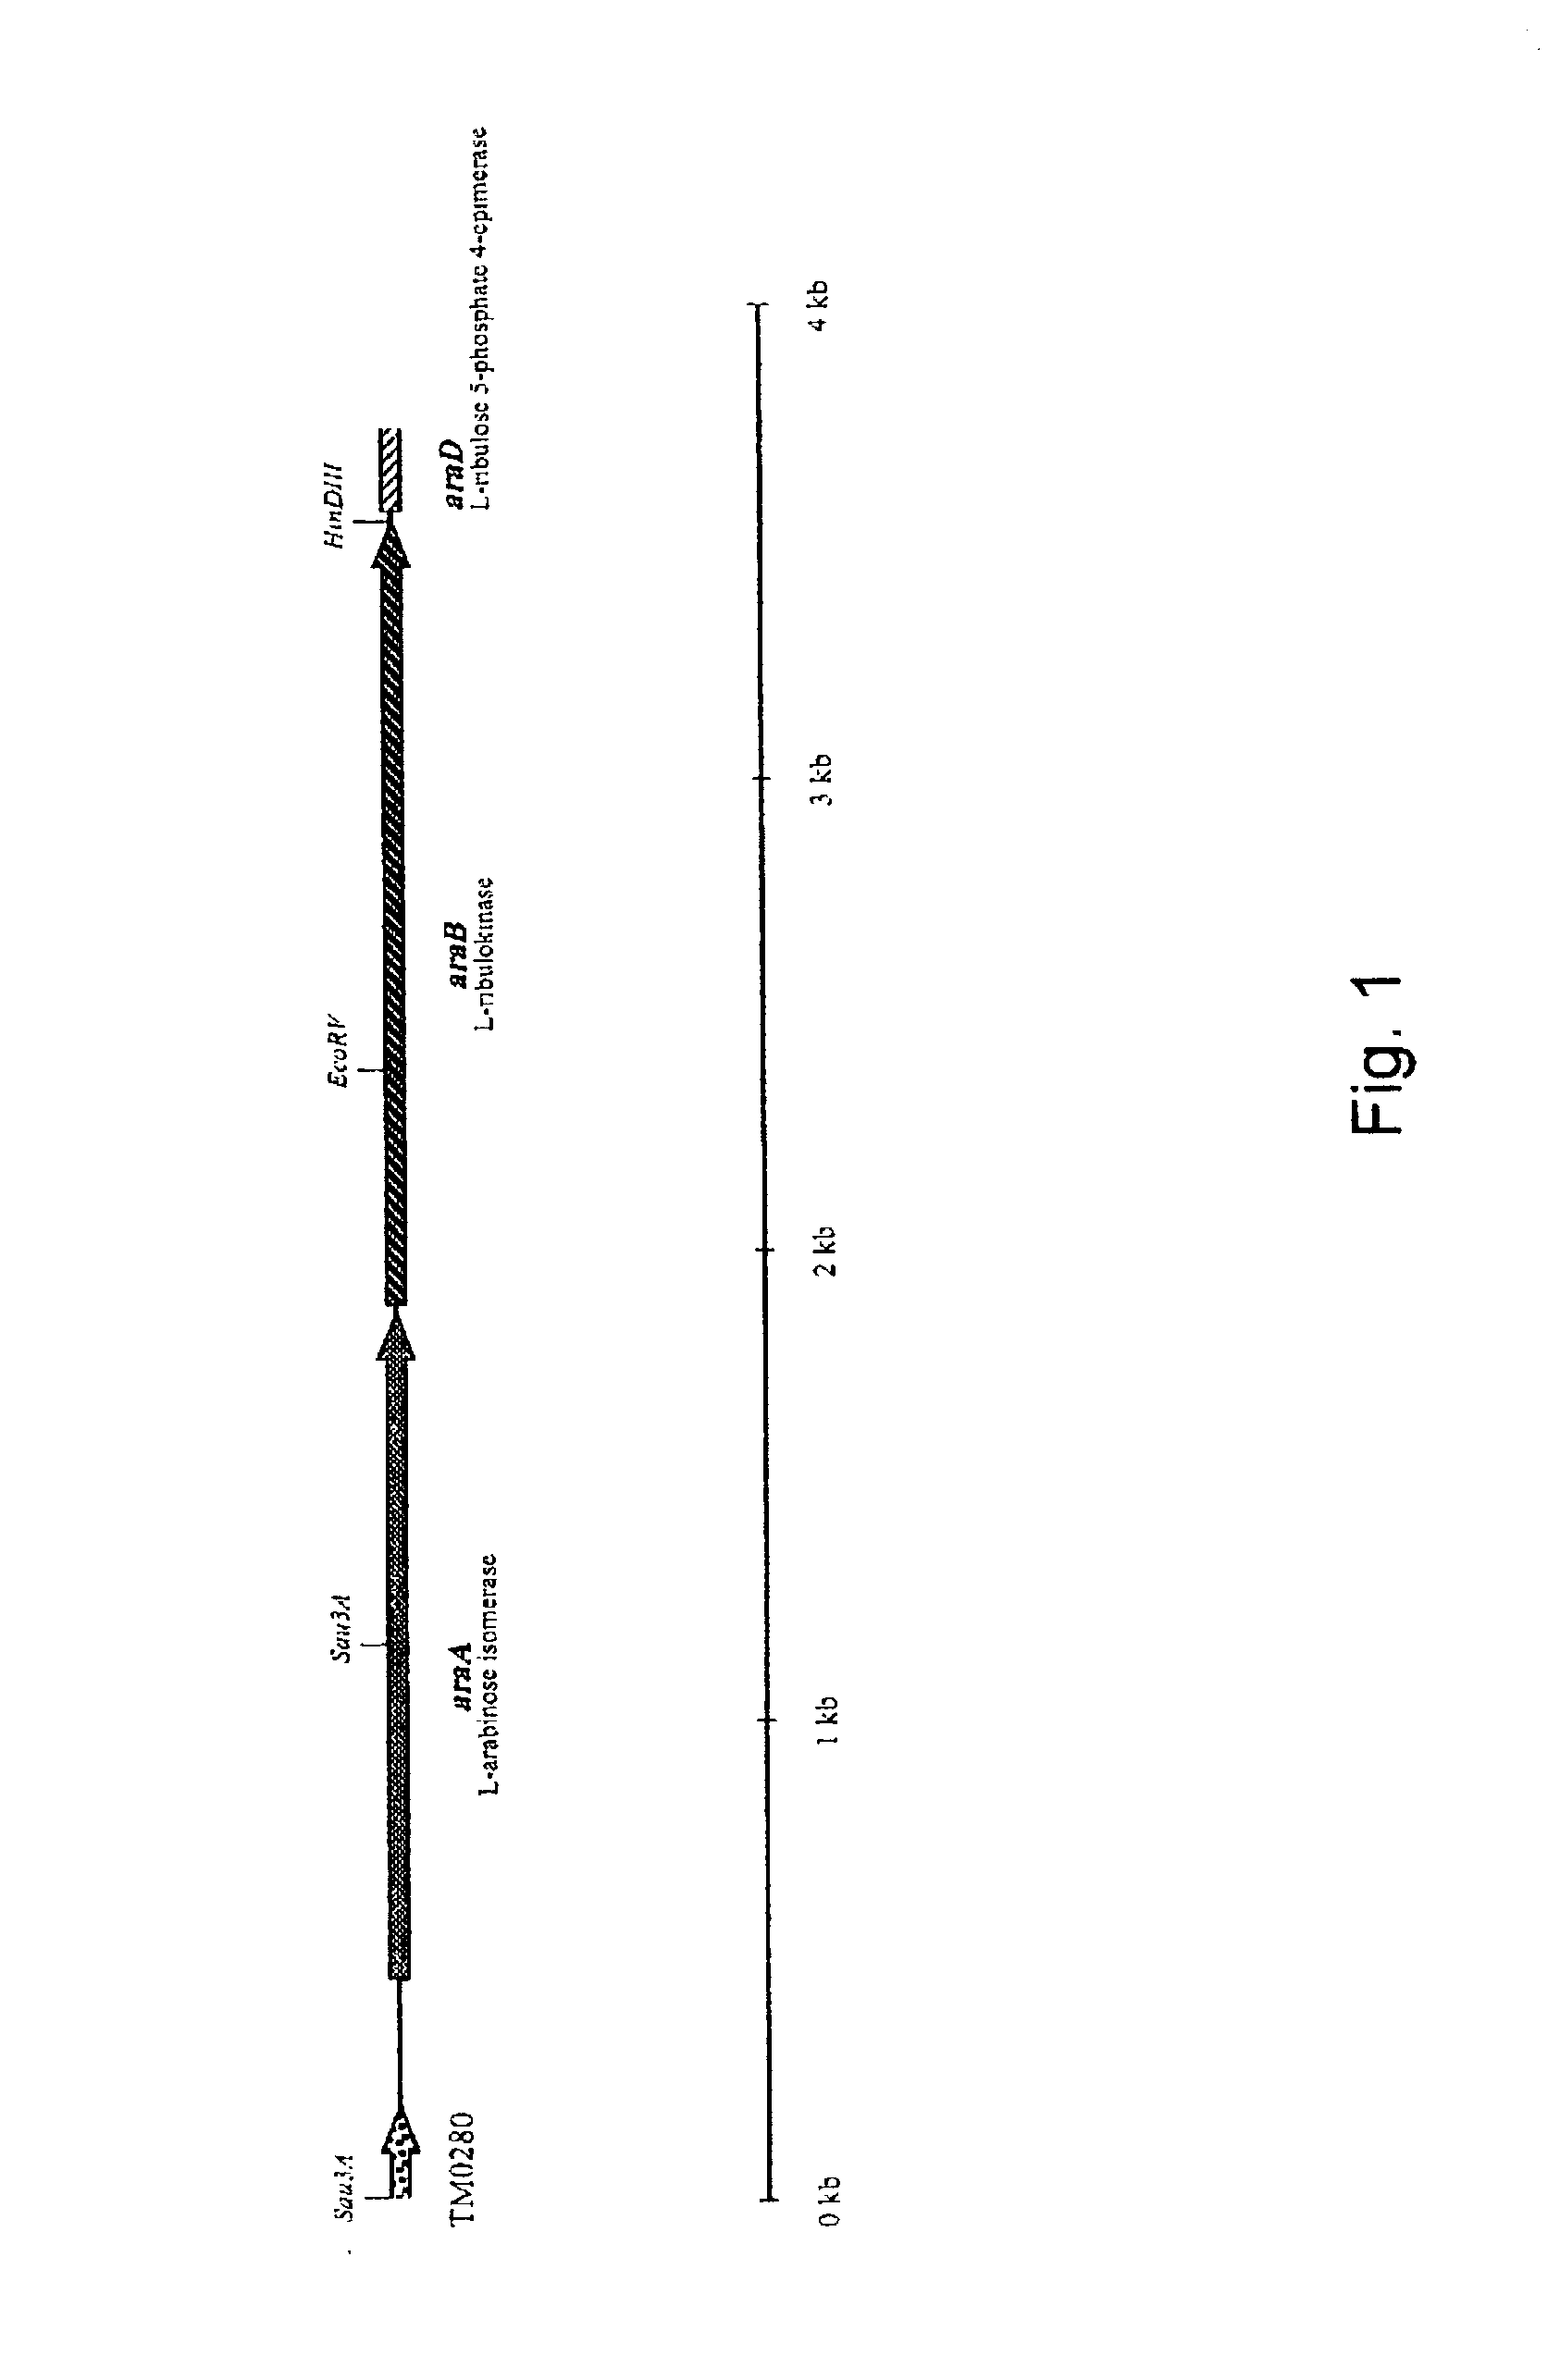 Novel thermostable isomerase and use hereof, in particular for producing tagatose